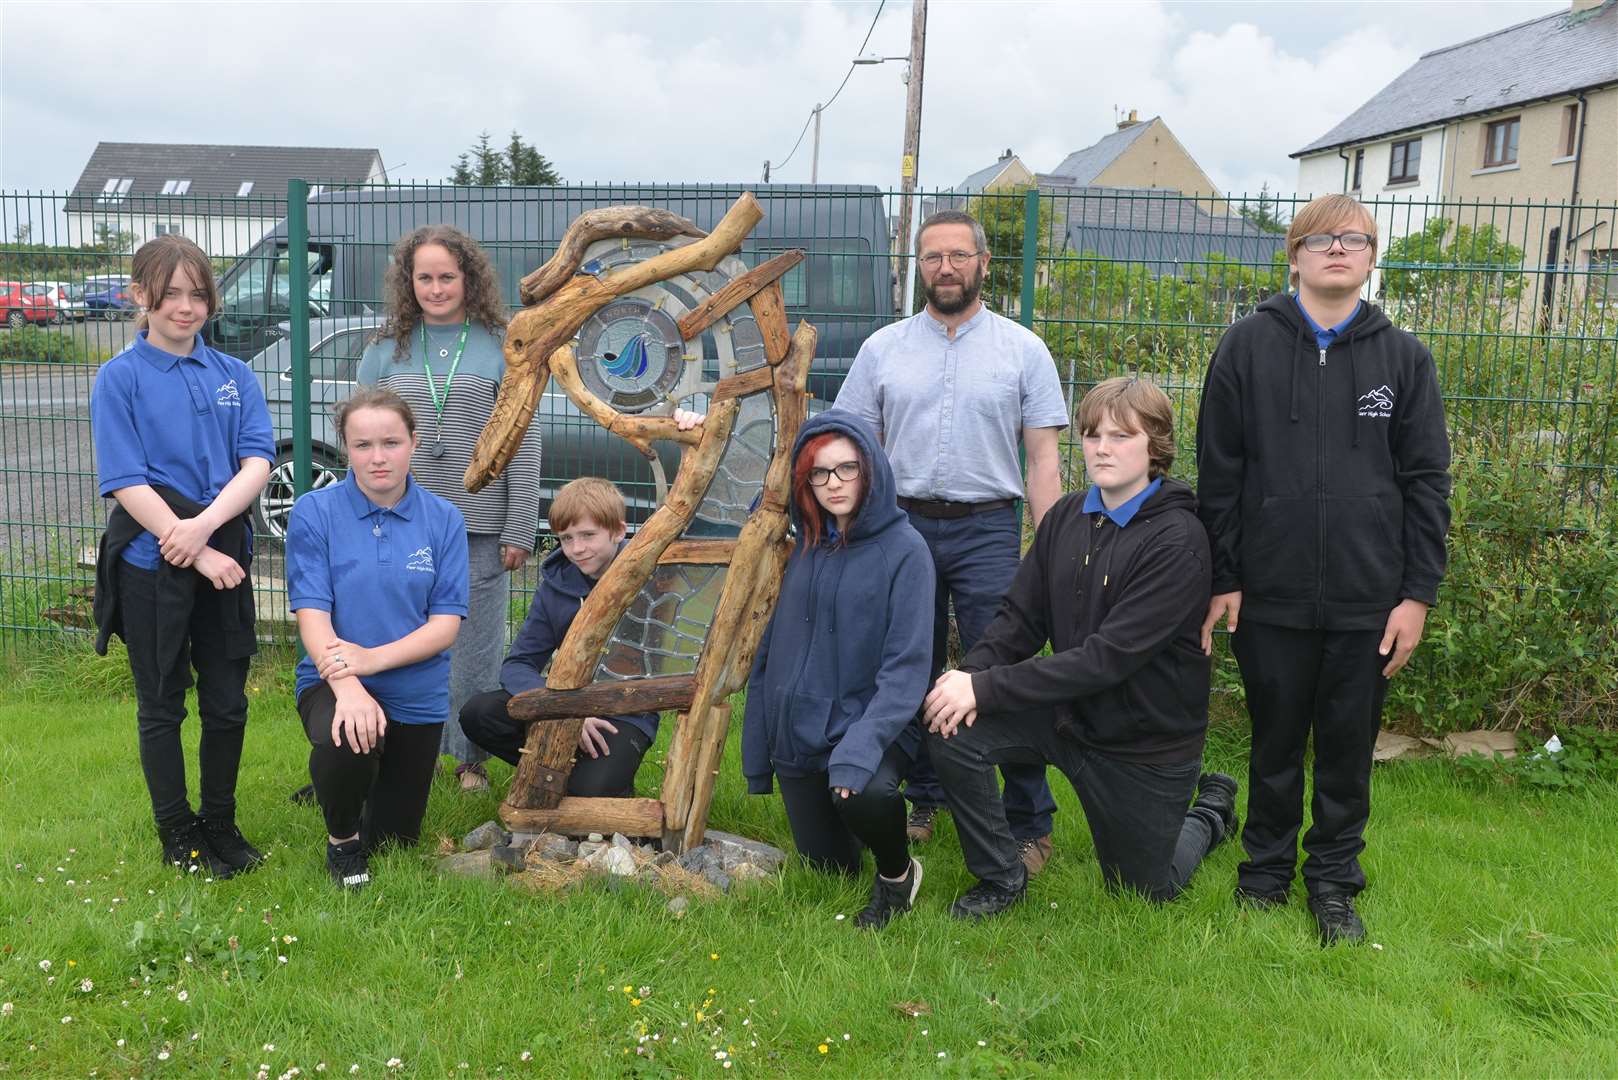 North Coast Campus head teacher Katherine Wood and glass artist Michael Bullen stand next to one of the artworks with S2 students at Farr High School, left to right Rehanna Coles, Christina Gilmour , Iain Magee, Lucy Herd, Sam Heddle and Jayden Mackay.